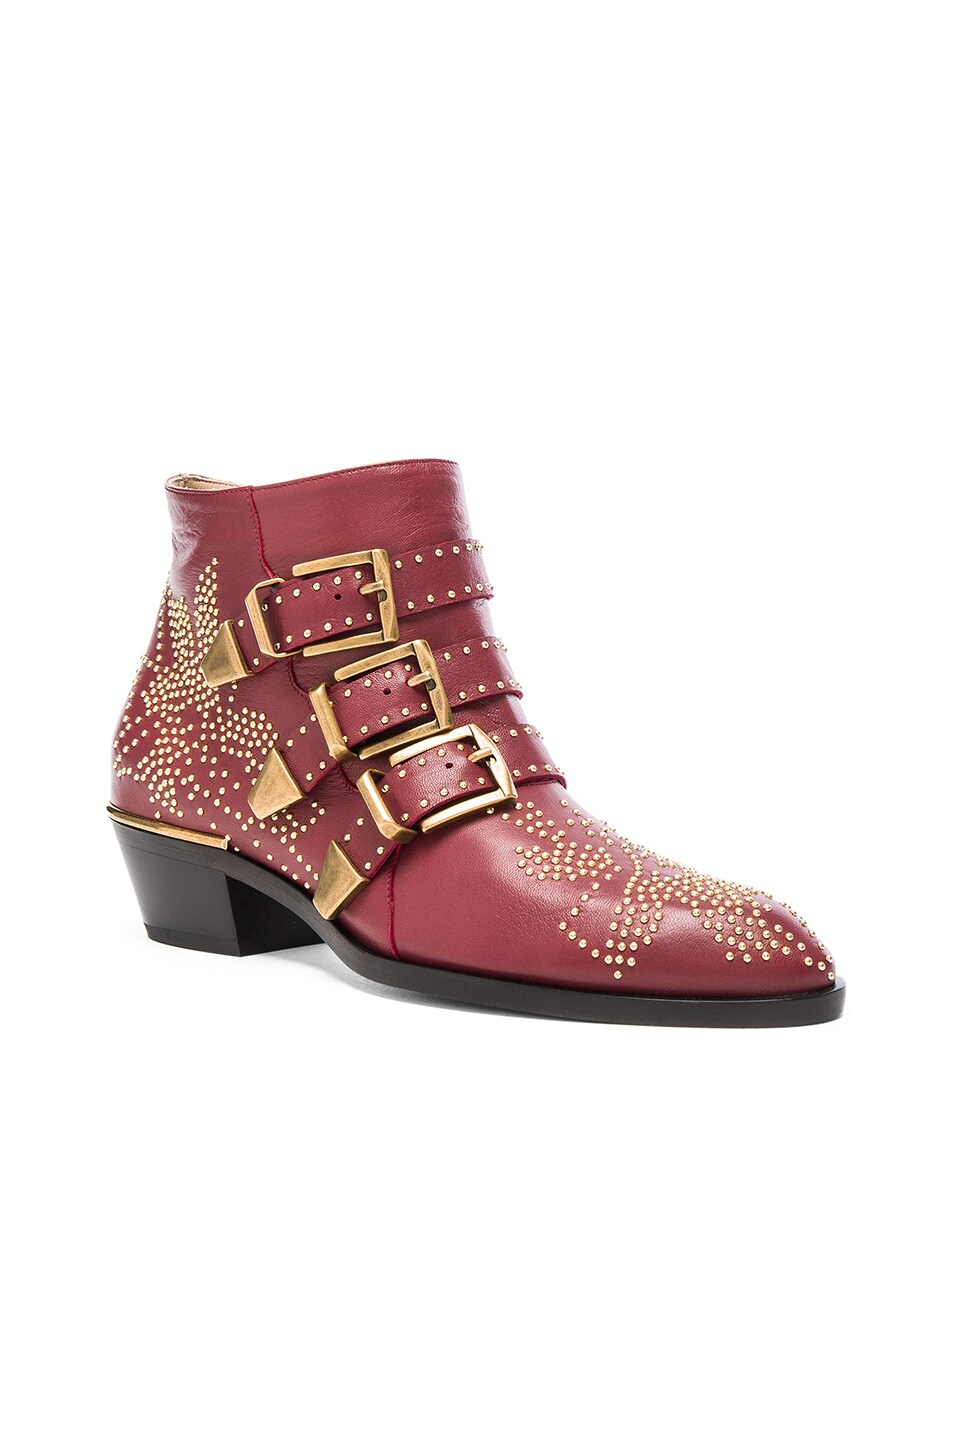 CHLOÉ CHLOE SUSANNA LEATHER STUDDED BOOTIES IN RED